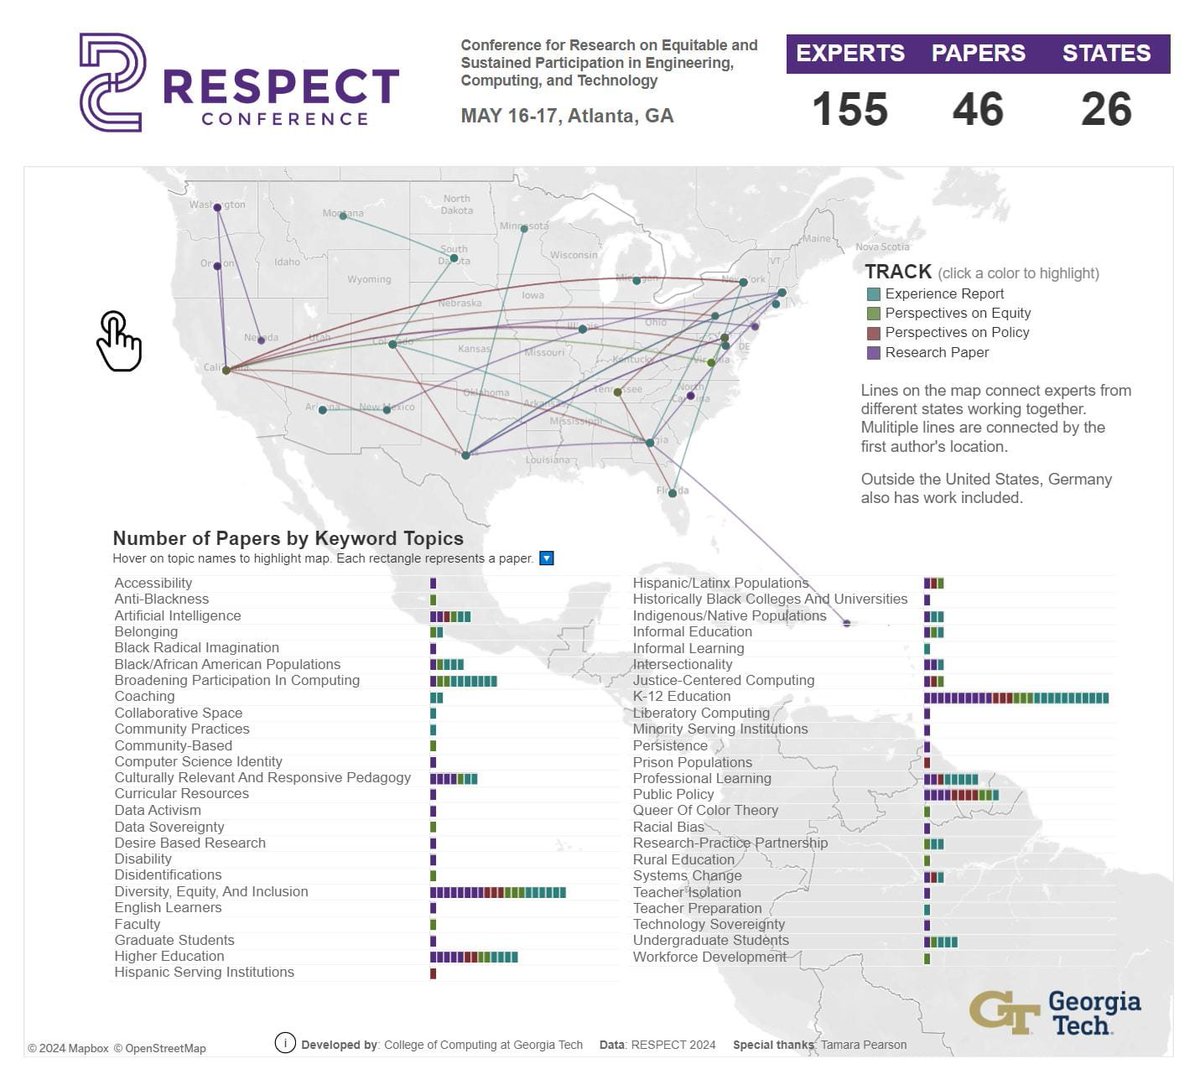 What are the current trends in computer science education research to help marginalized and underrepresented students? This map explores new peer-reviewed work by topics at the upcoming ACM RESPECT Conference. Interact with the map: public.tableau.com/views/respect2…